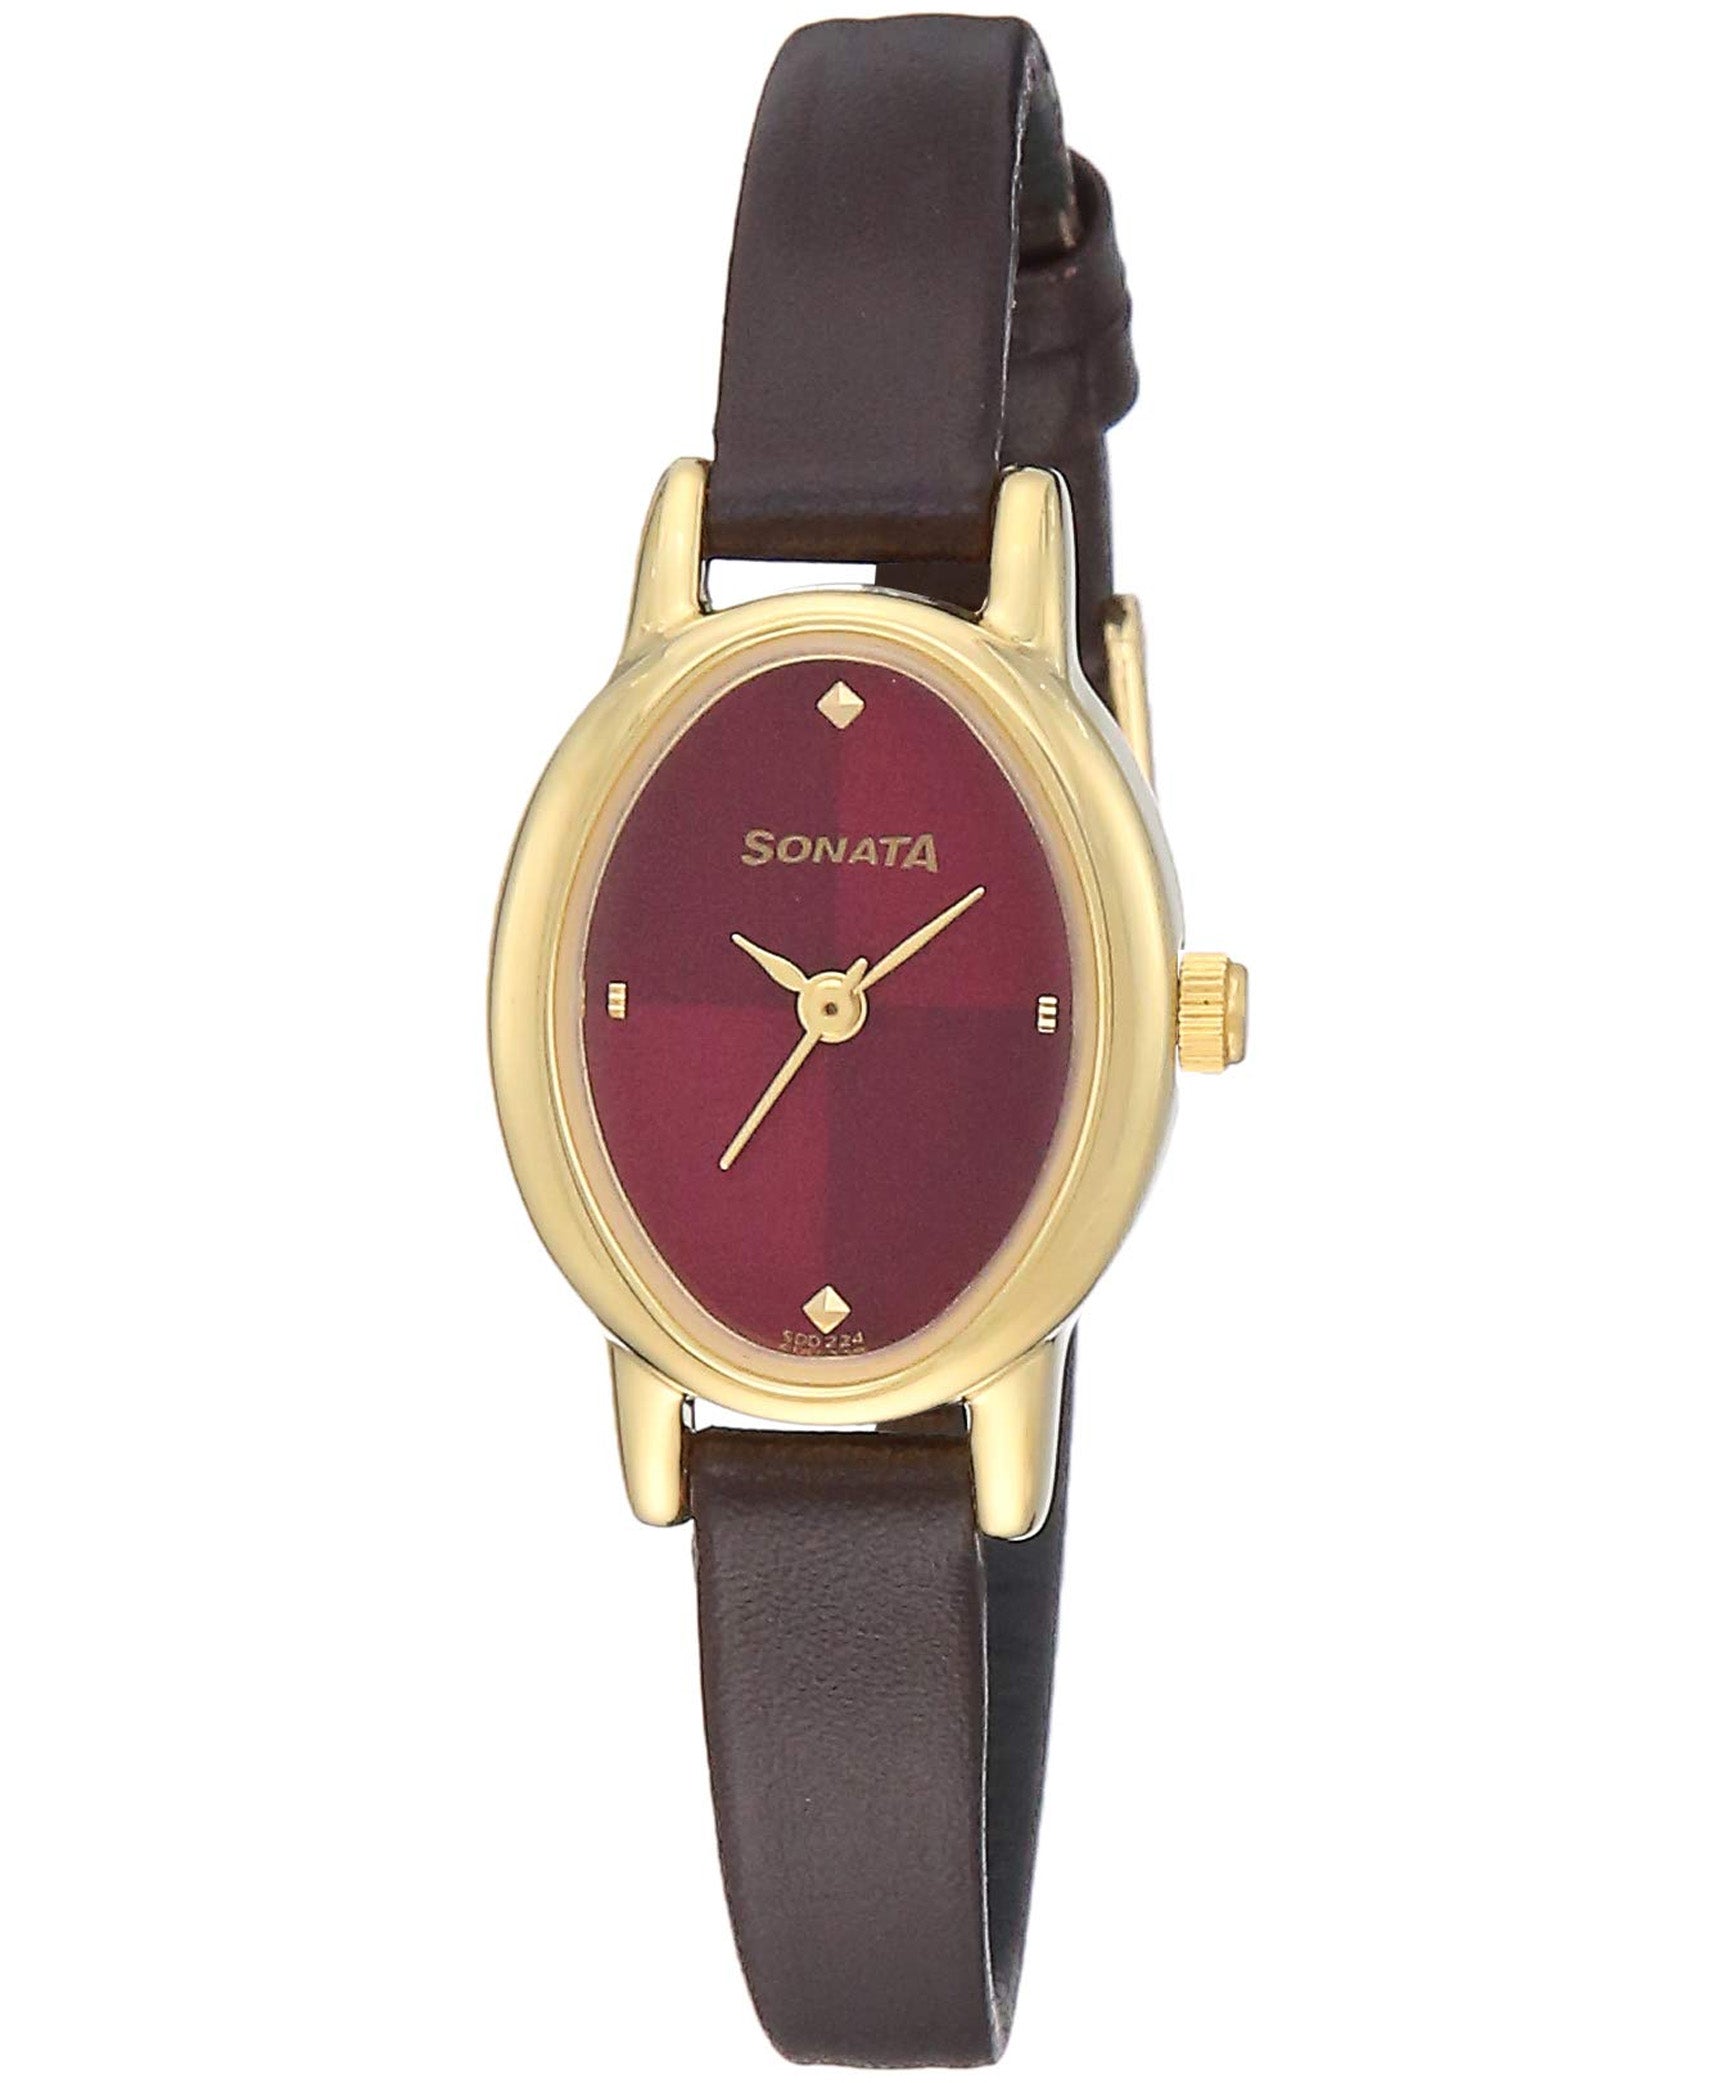 Sonata Women's Red Dial Brown Leather Strap Watch, 8100YL03